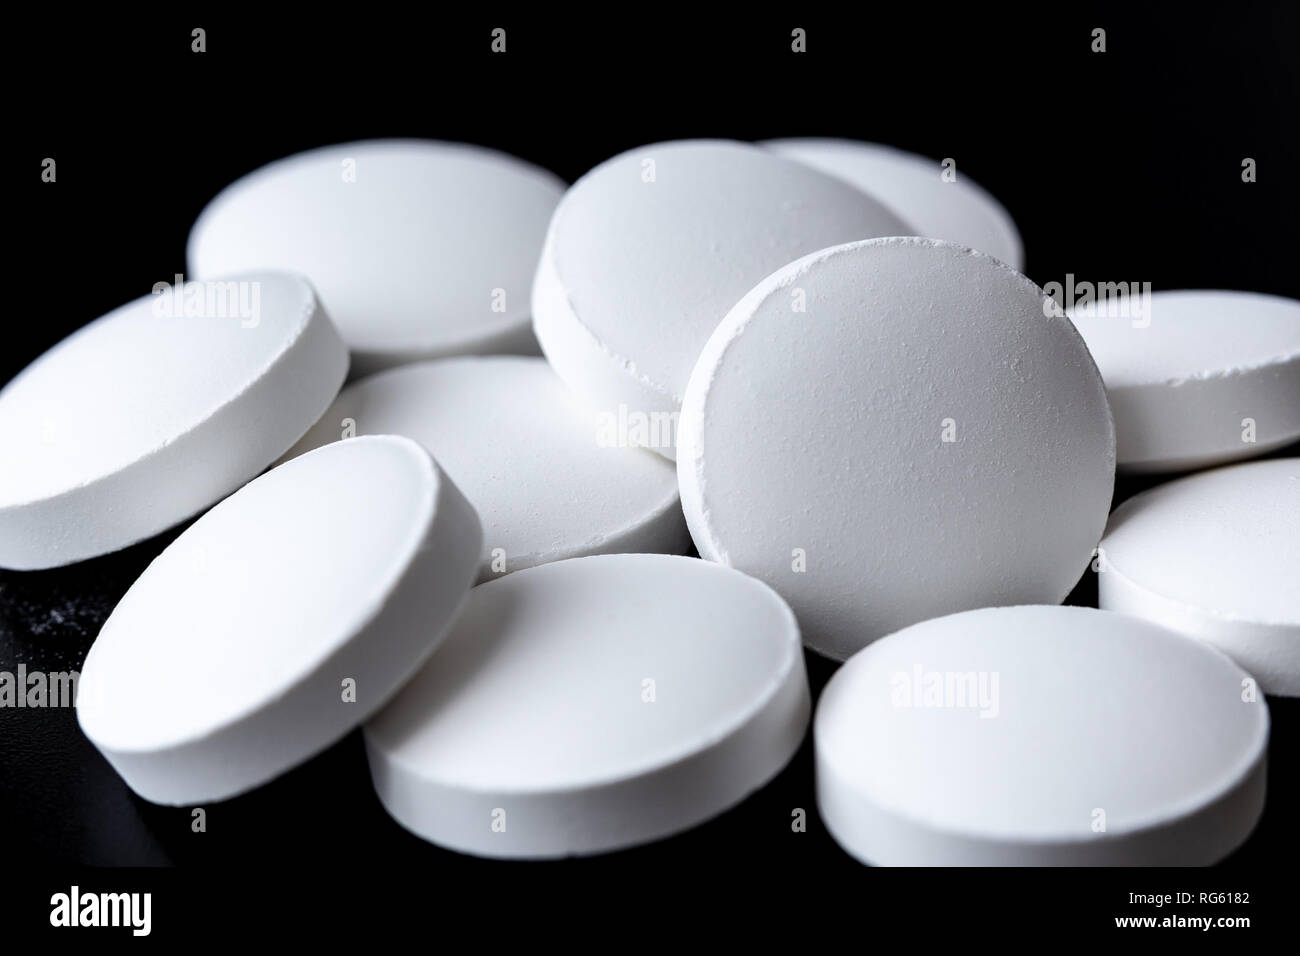 Heap of white pills on black background close up Stock Photo